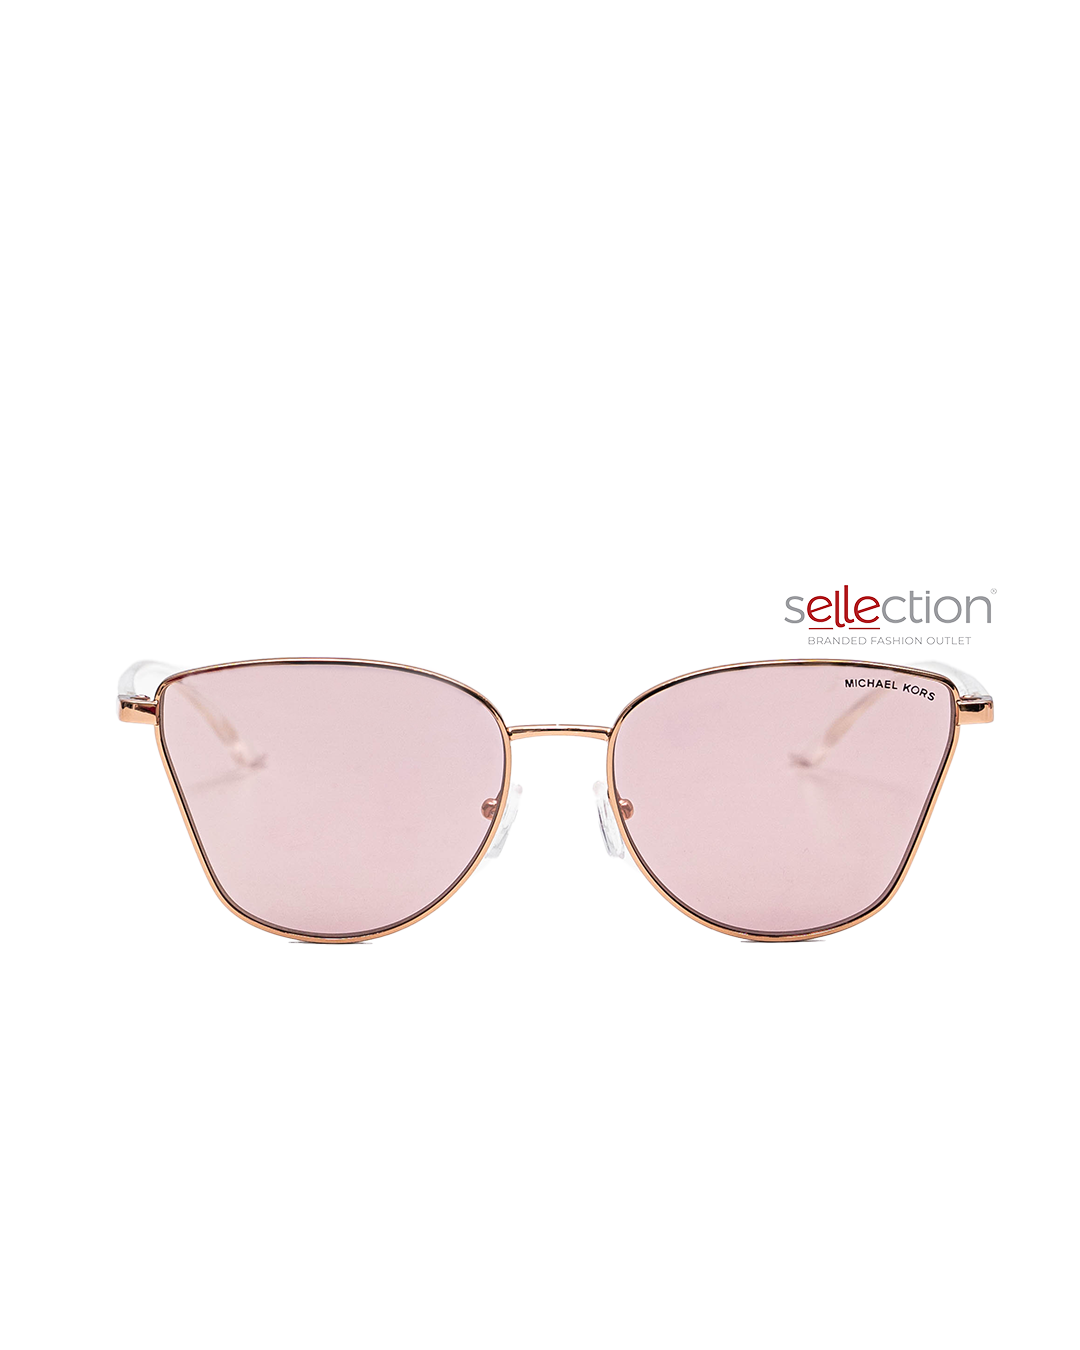 Michael Kors Outer Banks Sunglasses In Rose Gold